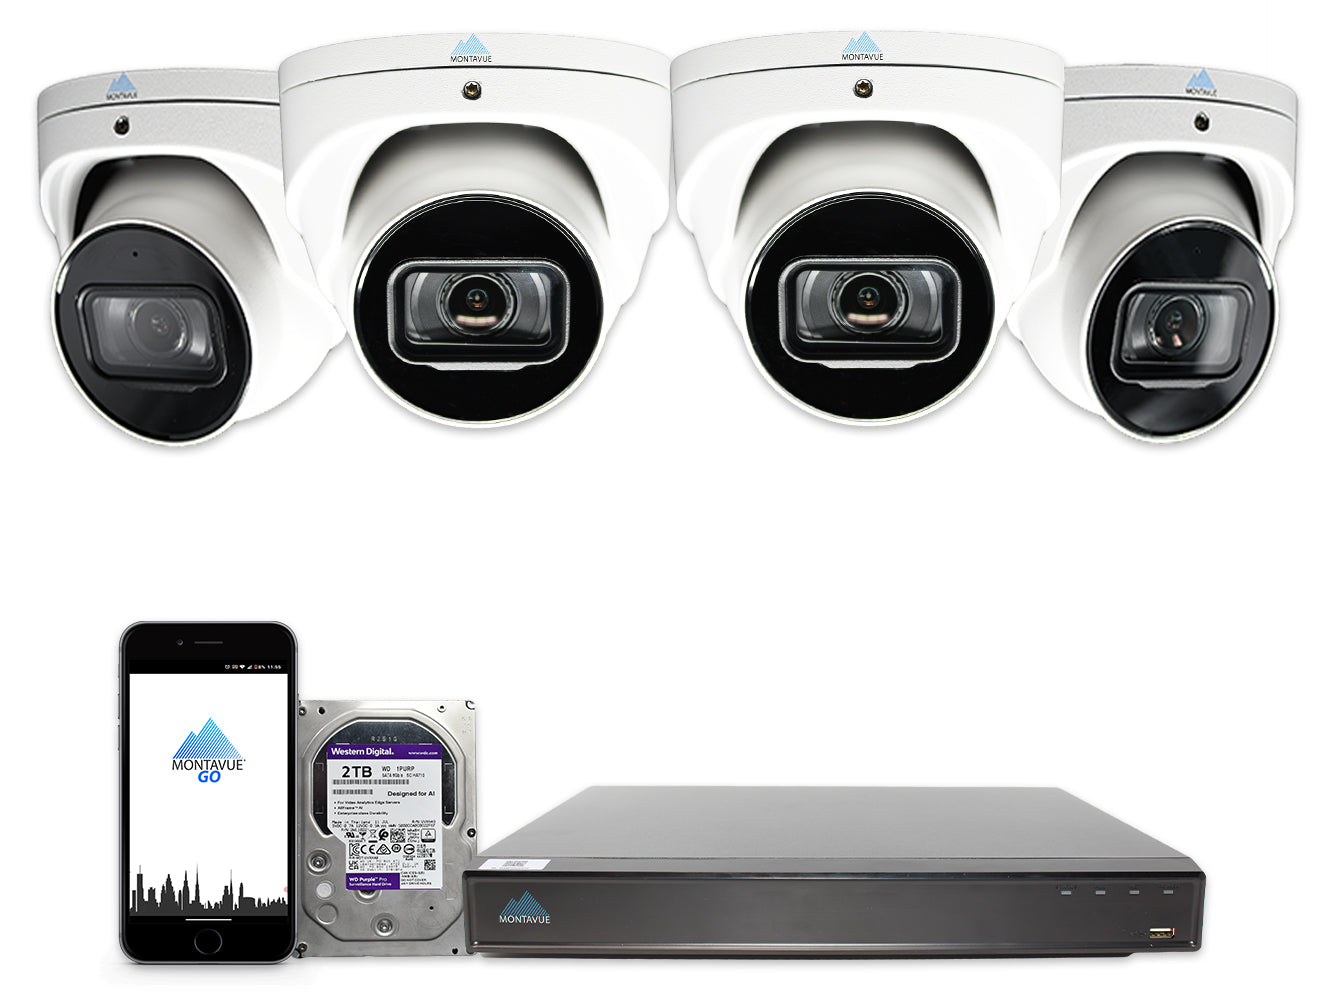 MTT8110 Package | 4K Acupick Turret Cameras and 8 Channel 5 Series AI NVR with 2TB HDD - Montavue